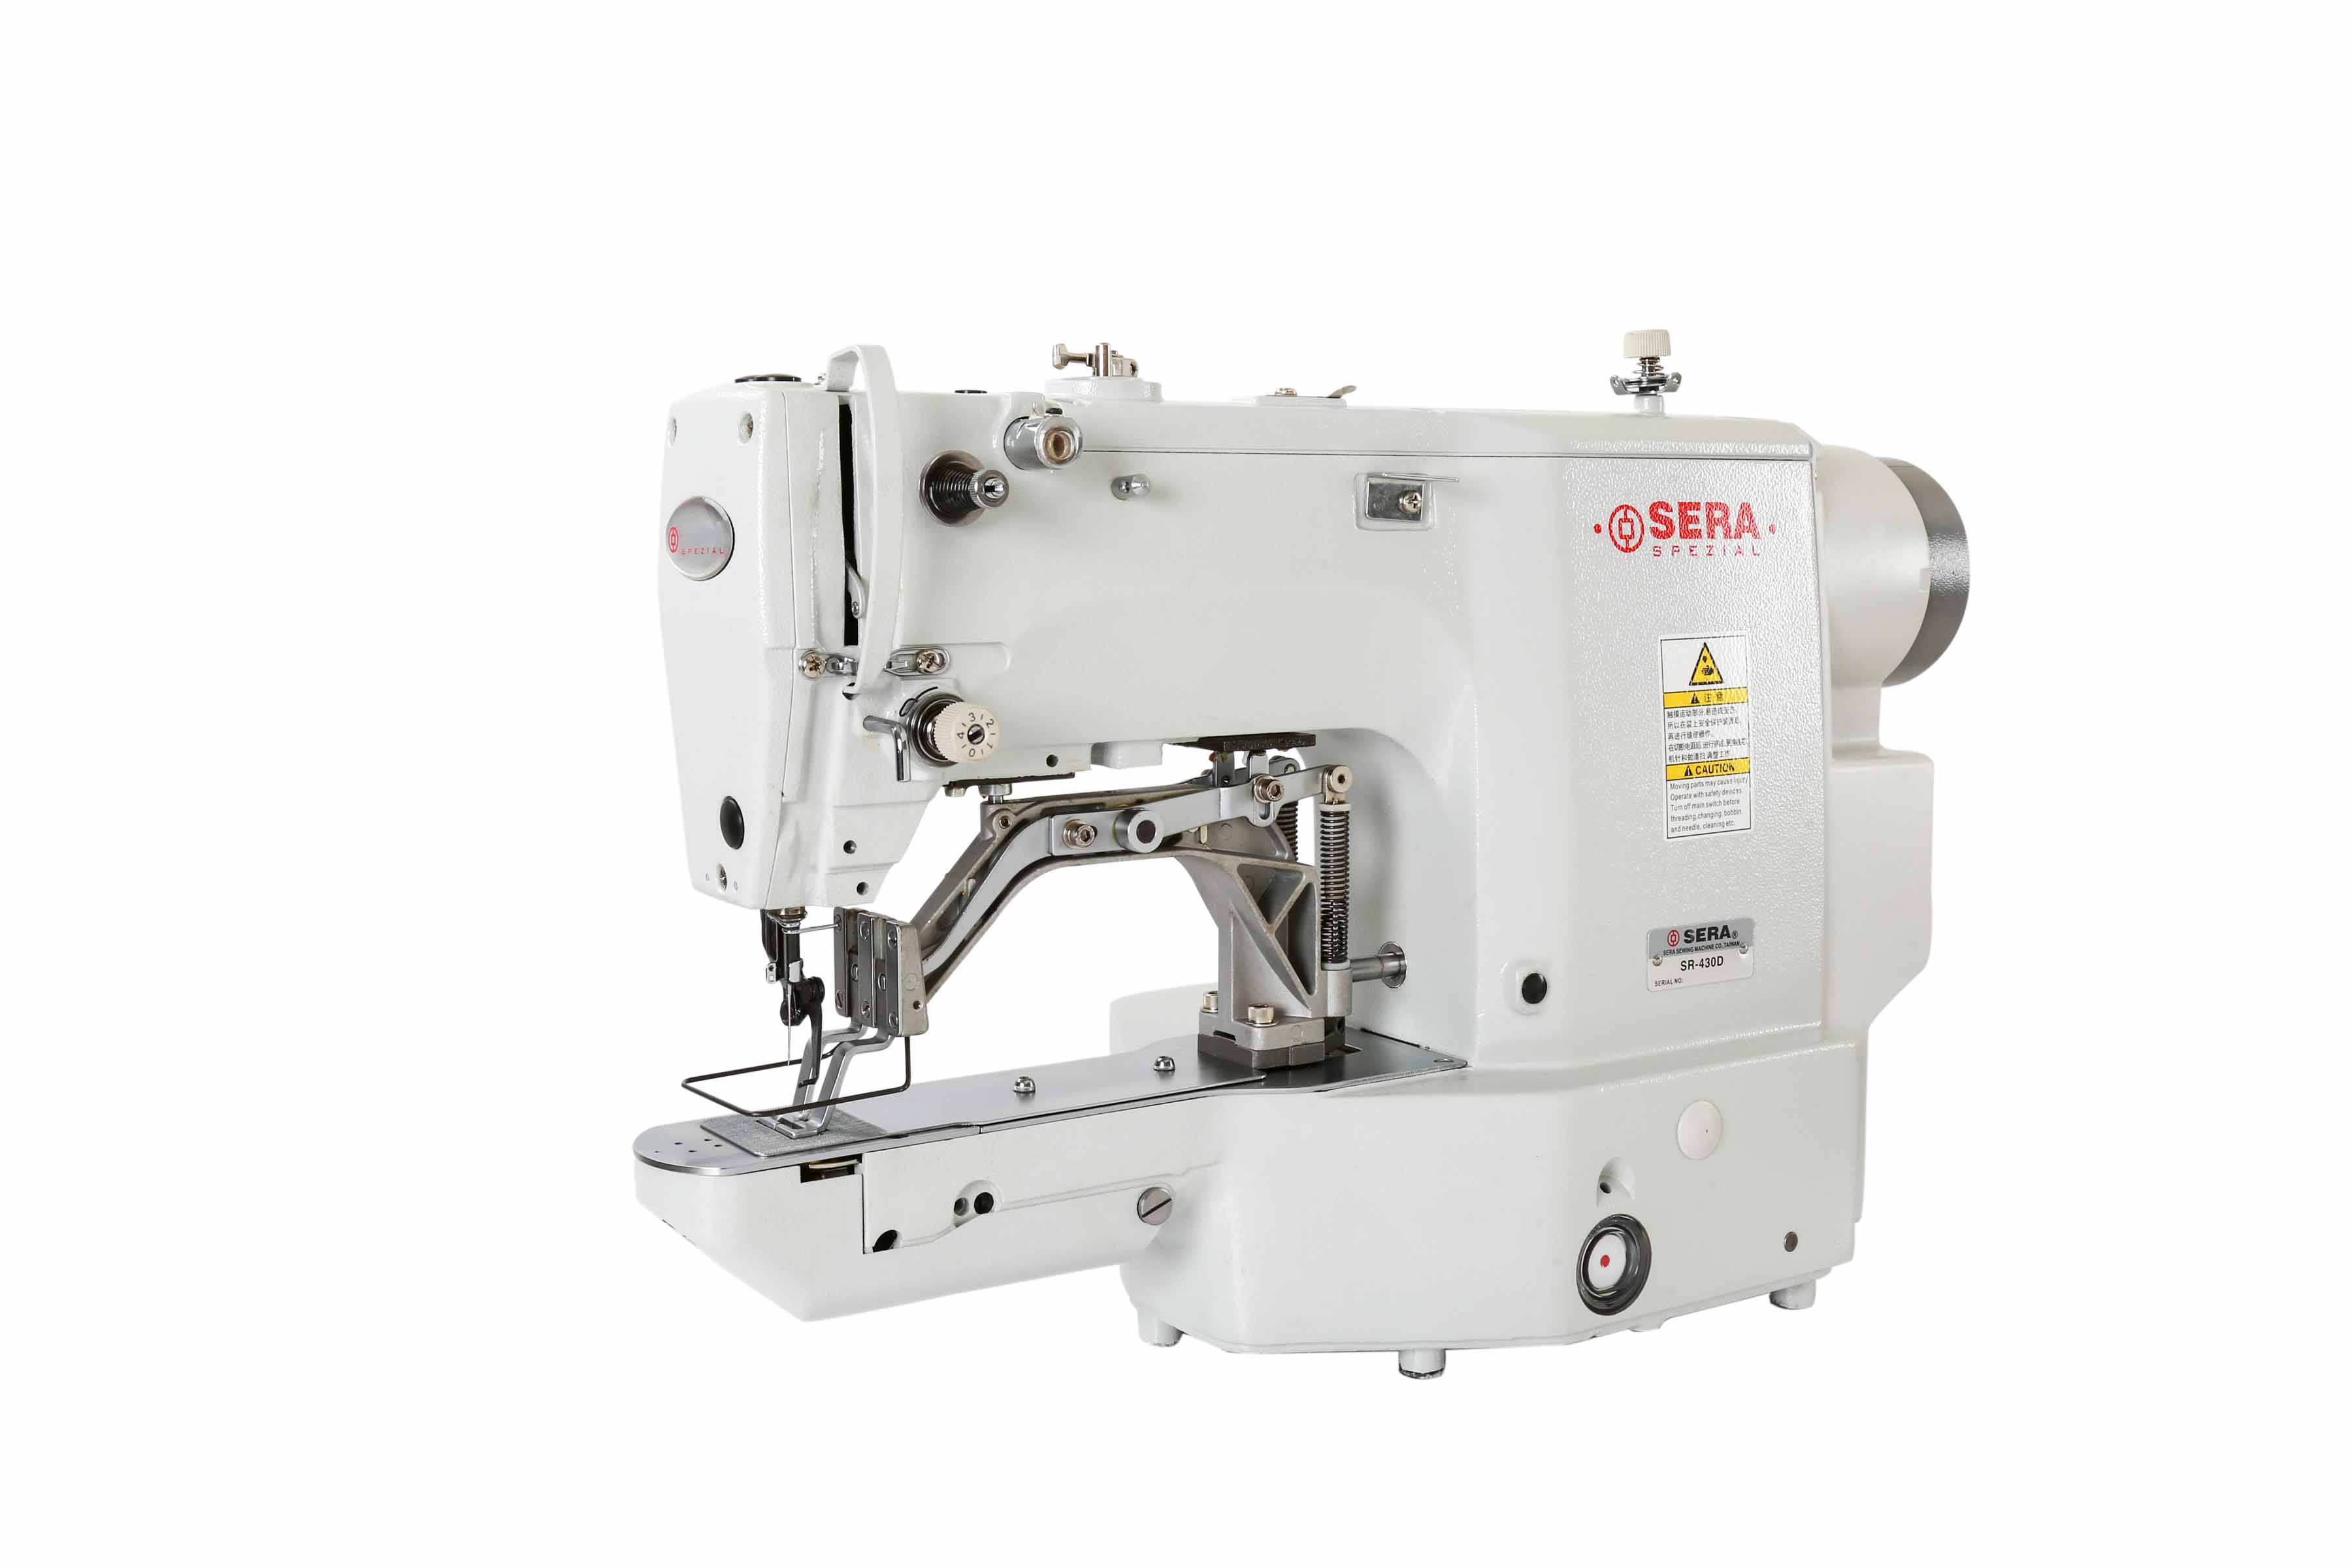 (Model: SR-1900) Electronic Button Stitch Sewing Machine Manufacturers, Suppliers, Importers, Dealers in Mumbai India